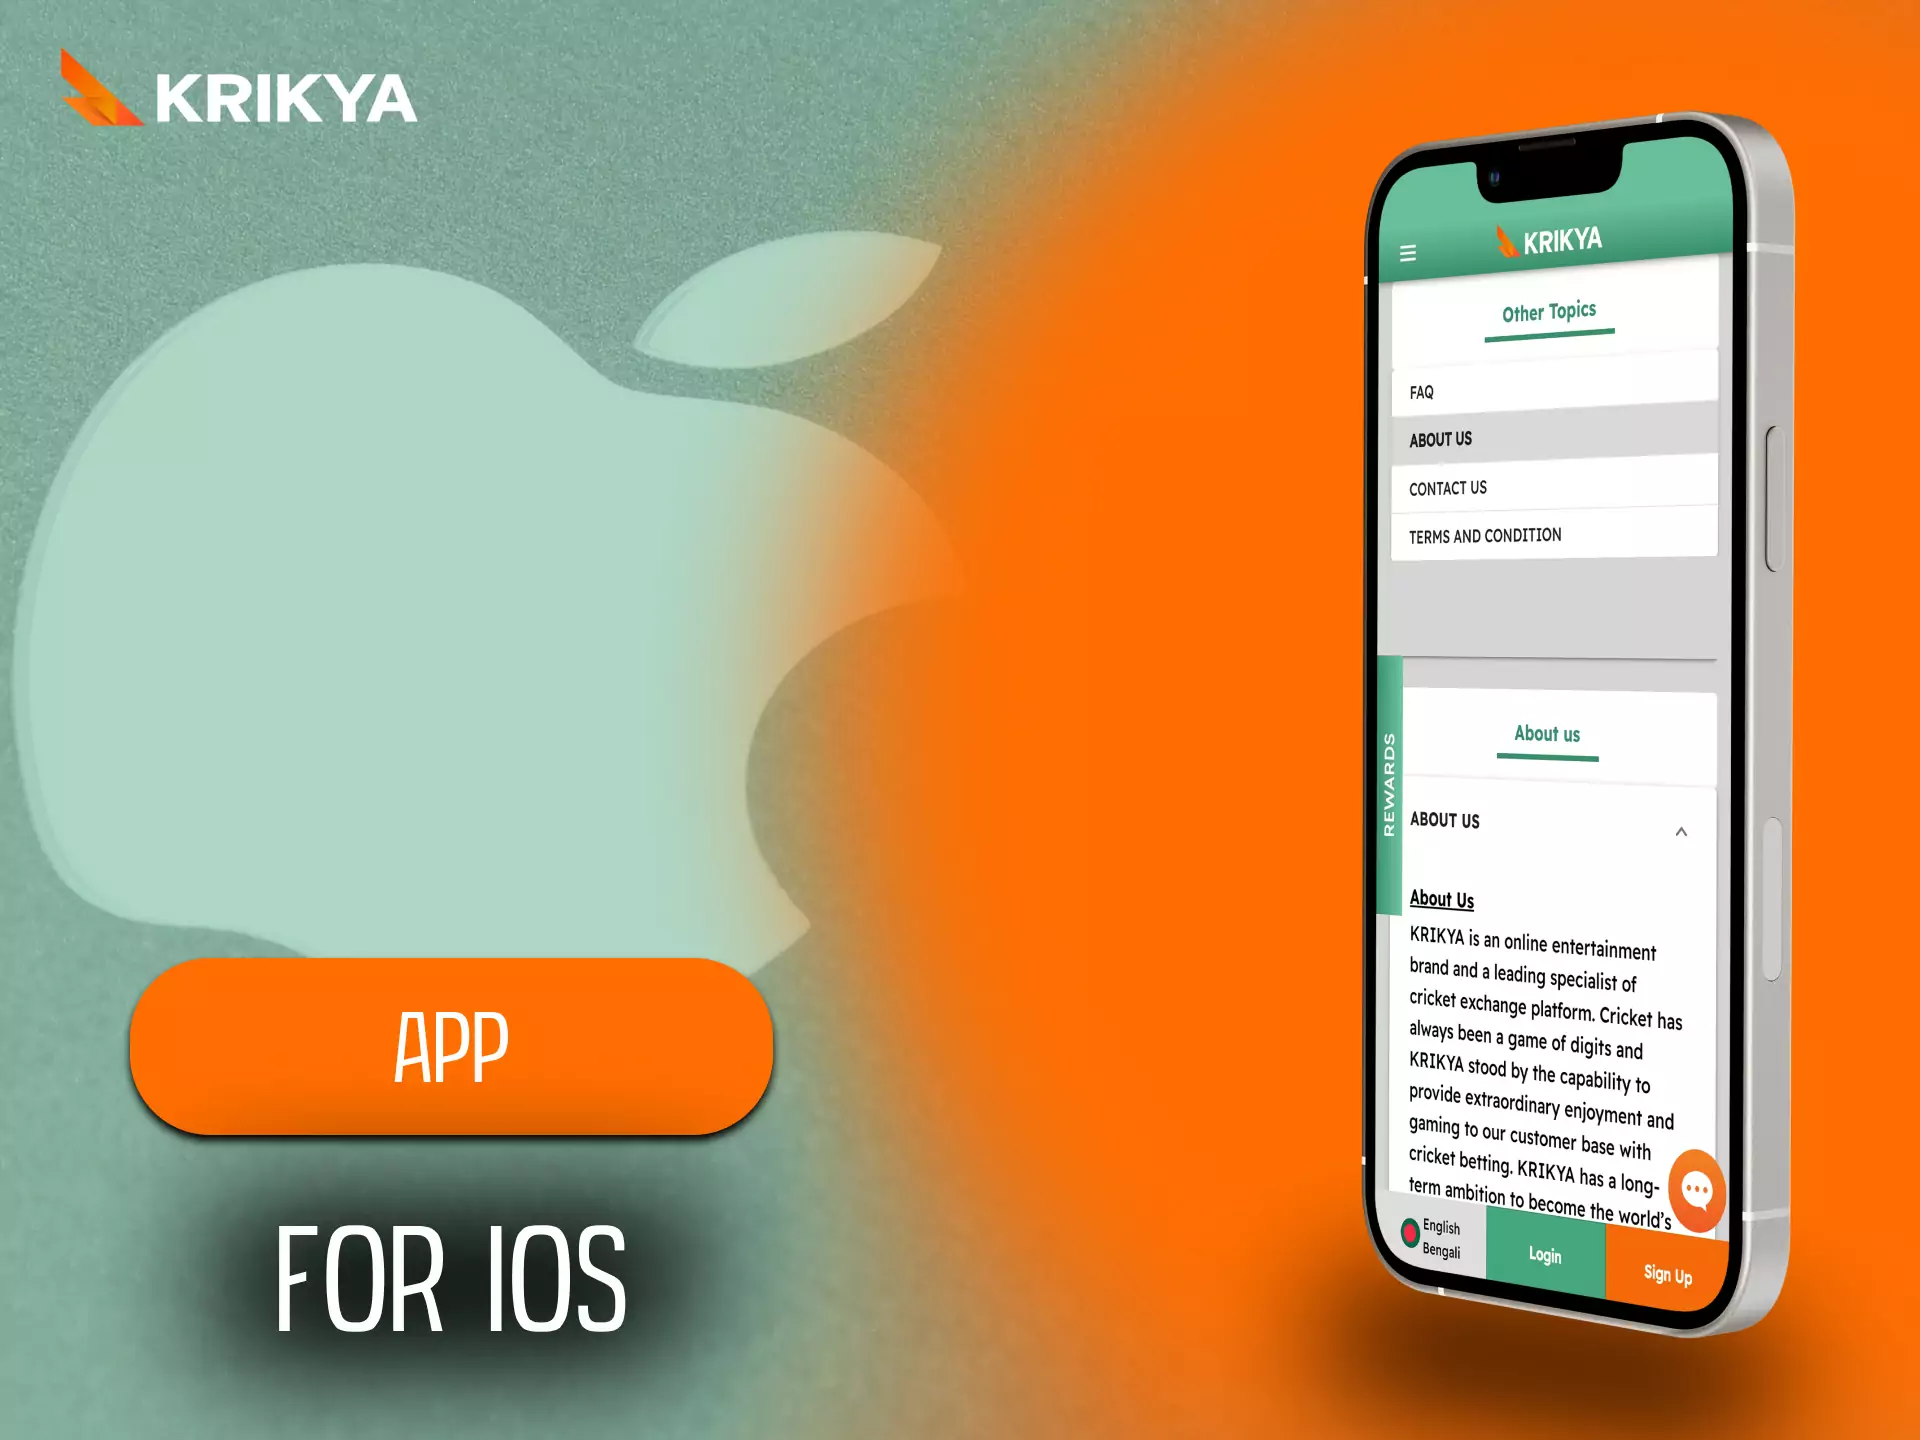 Krikya has a user-friendly app for users with iOS devices.